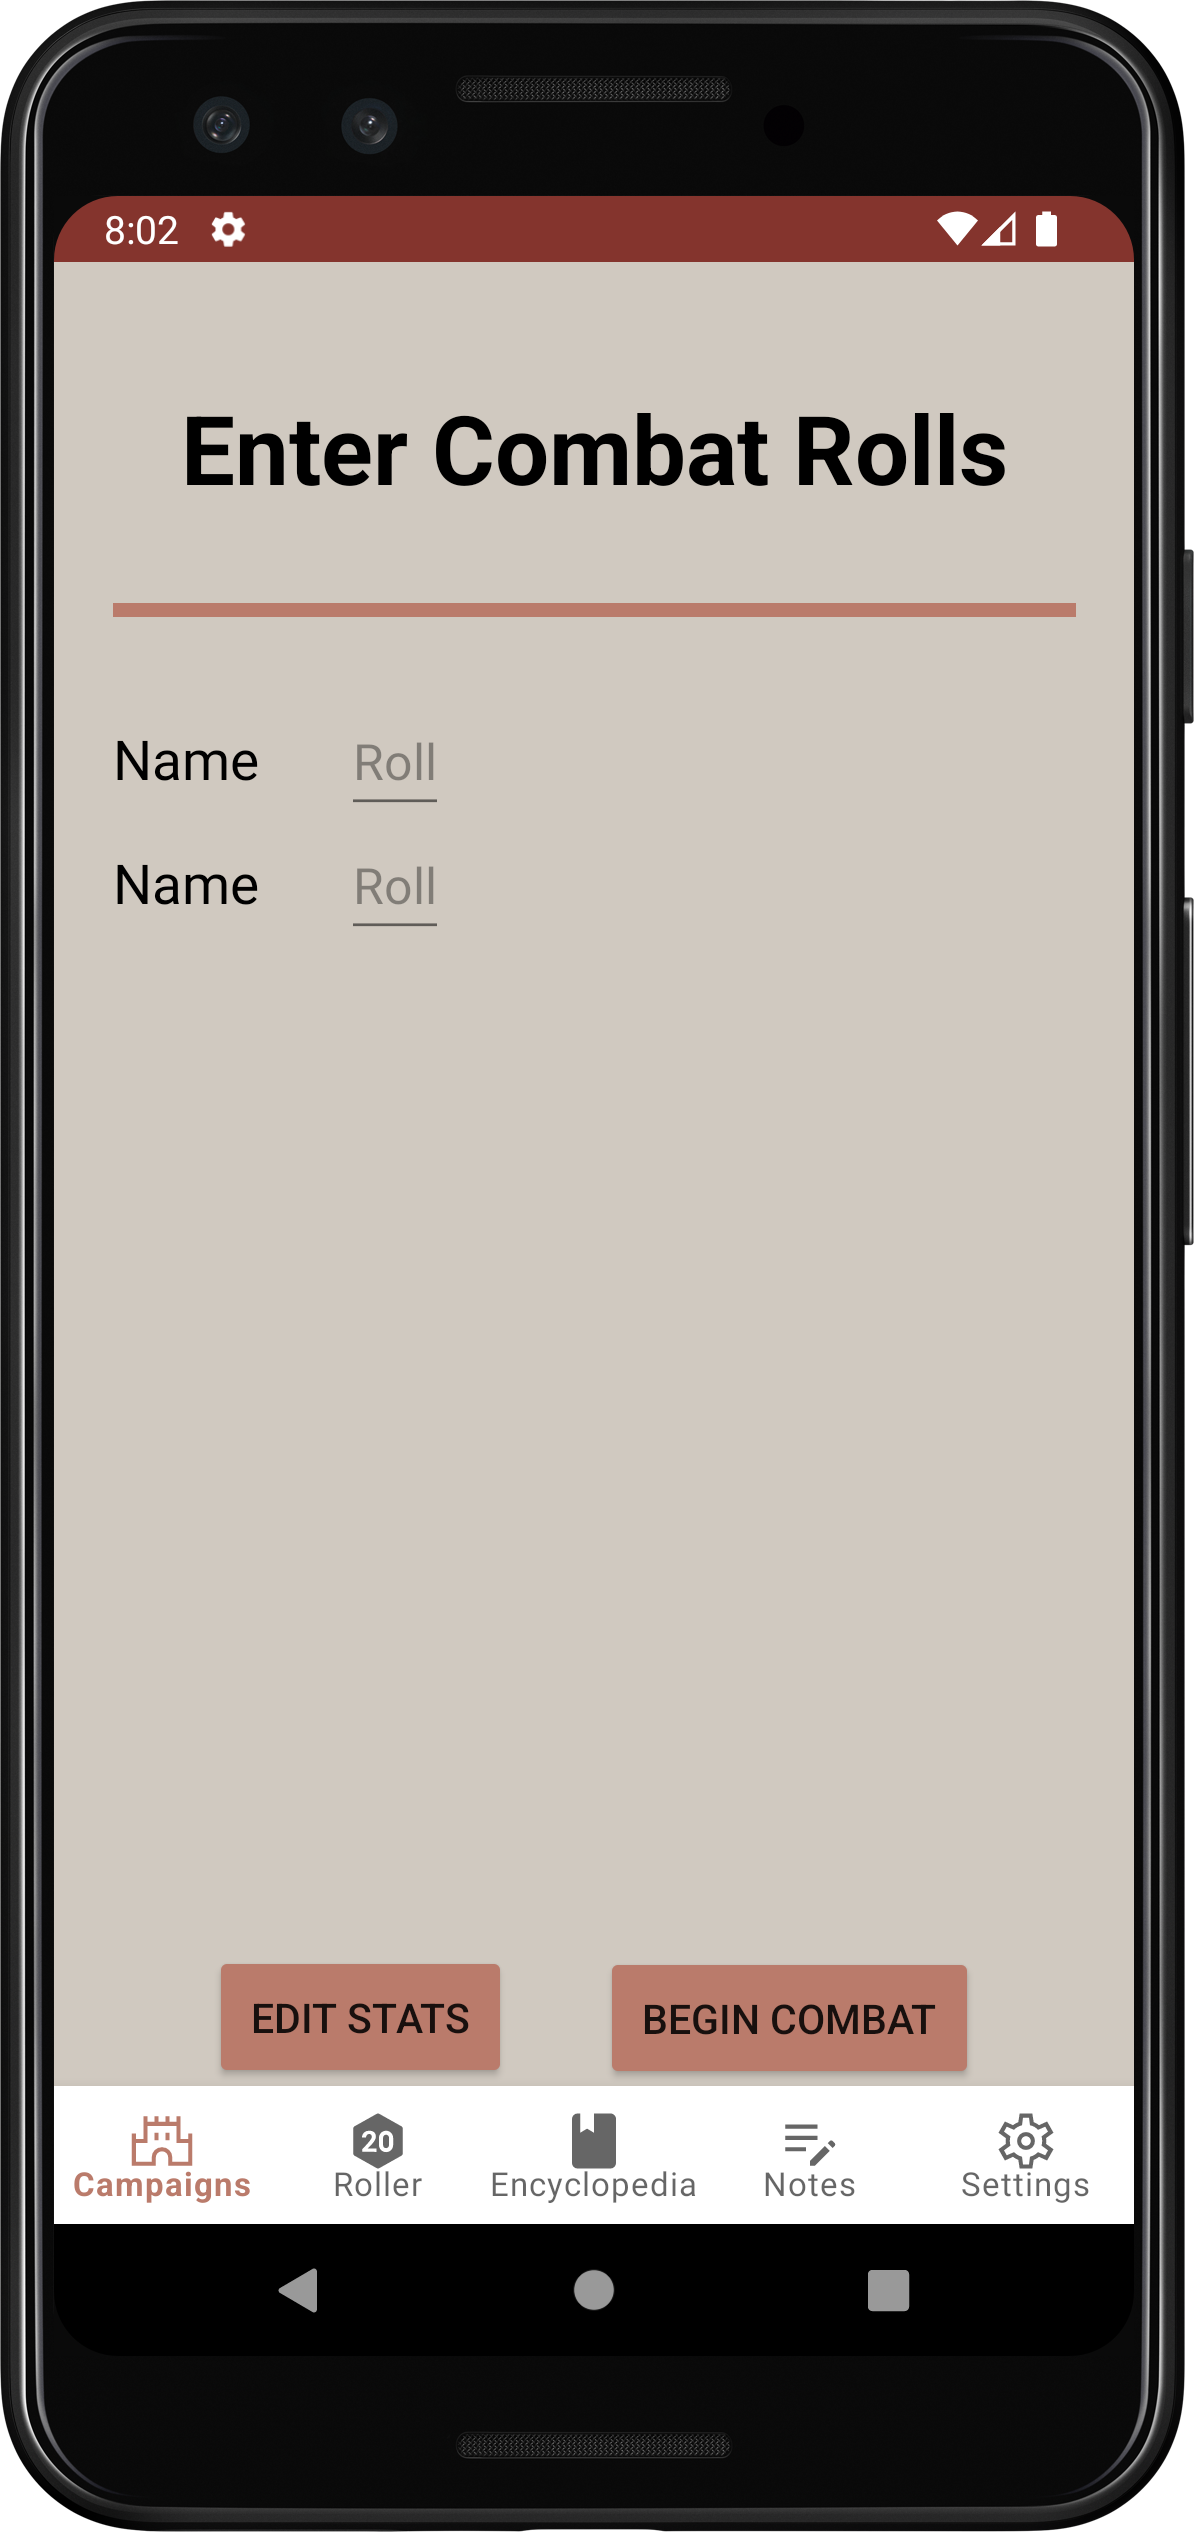 The combat screen for a campaign. This lists allows the user to add initiative rolls for each character, player and/or enemy in the campaign.